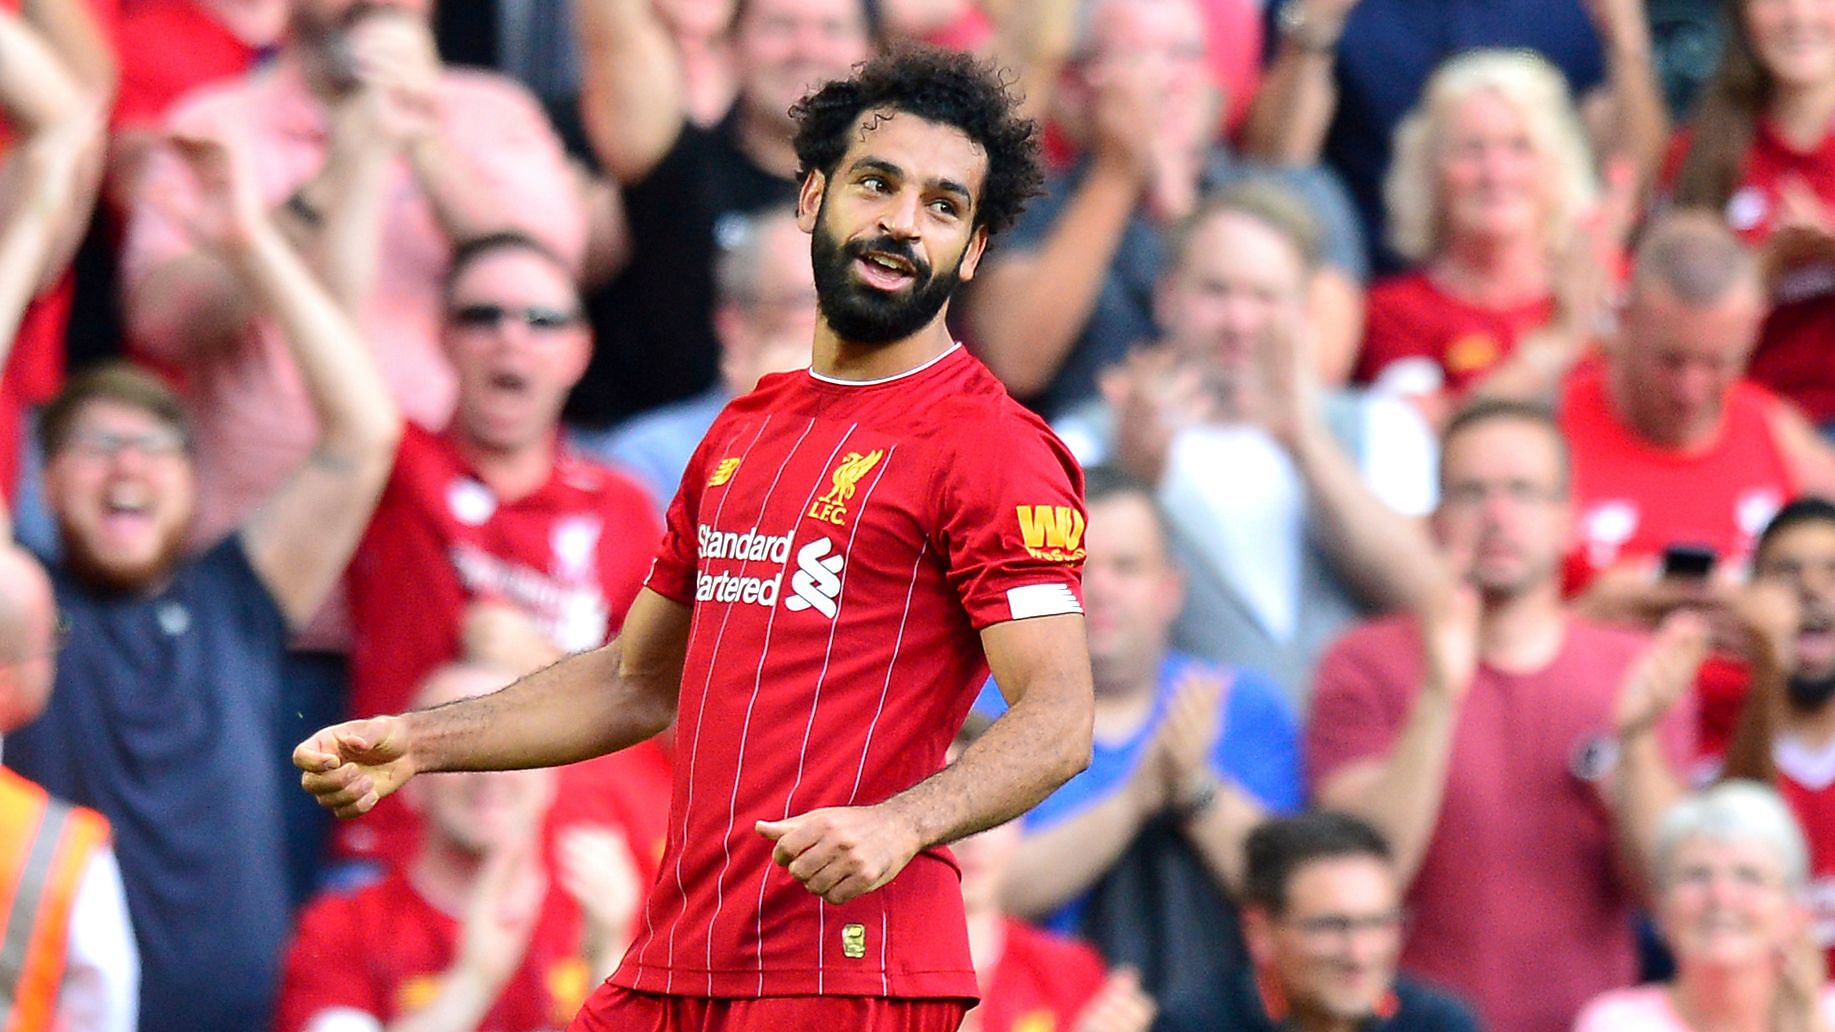 With one of the best goals so far this season, Salah capped Liverpool’s 3-1 win over Arsenal.